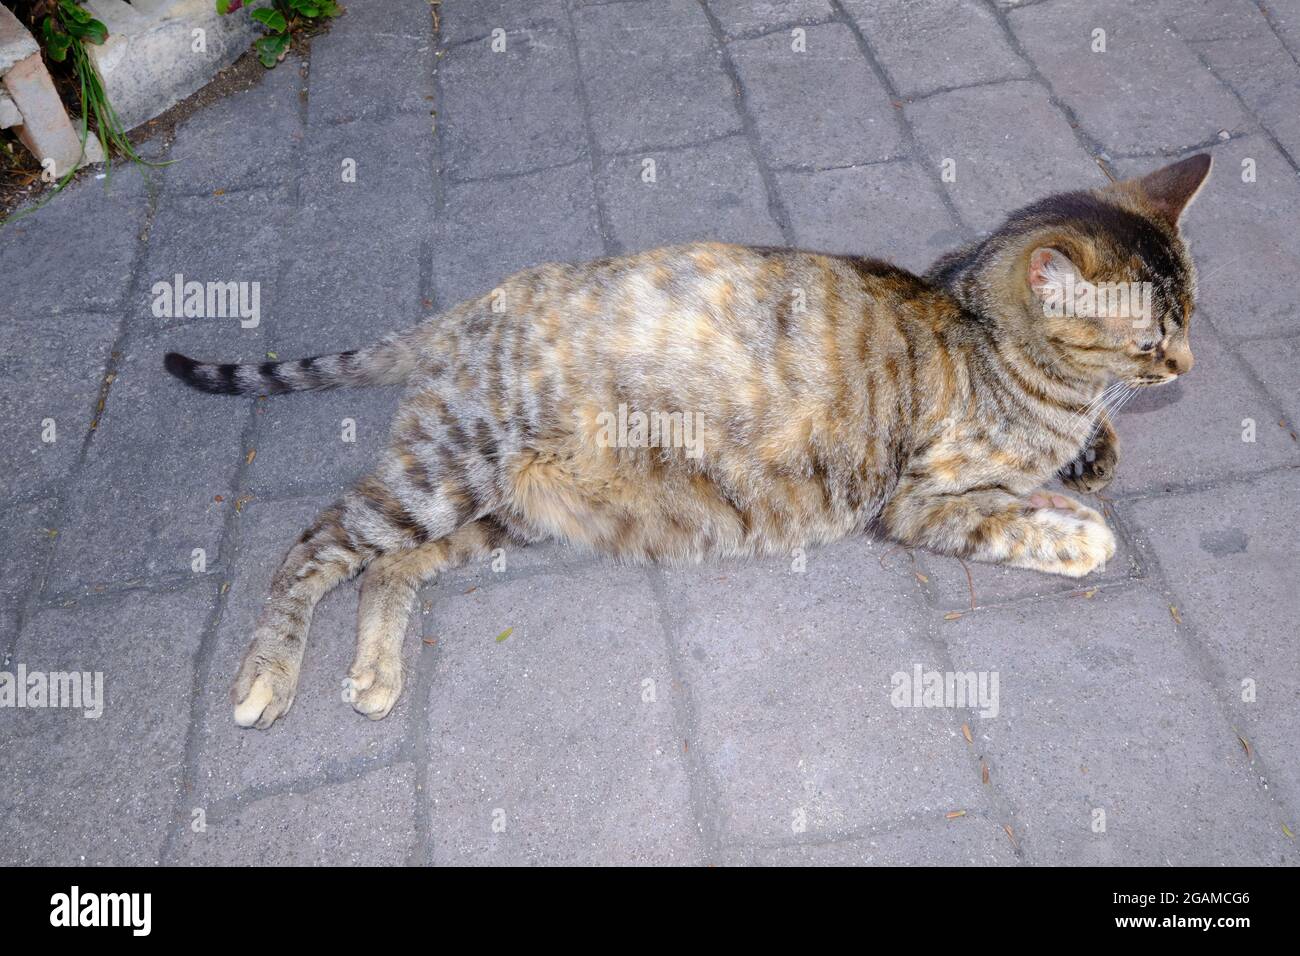 Pregnant cat resting. Cat with a big belly lying on the cement. Stock Photo